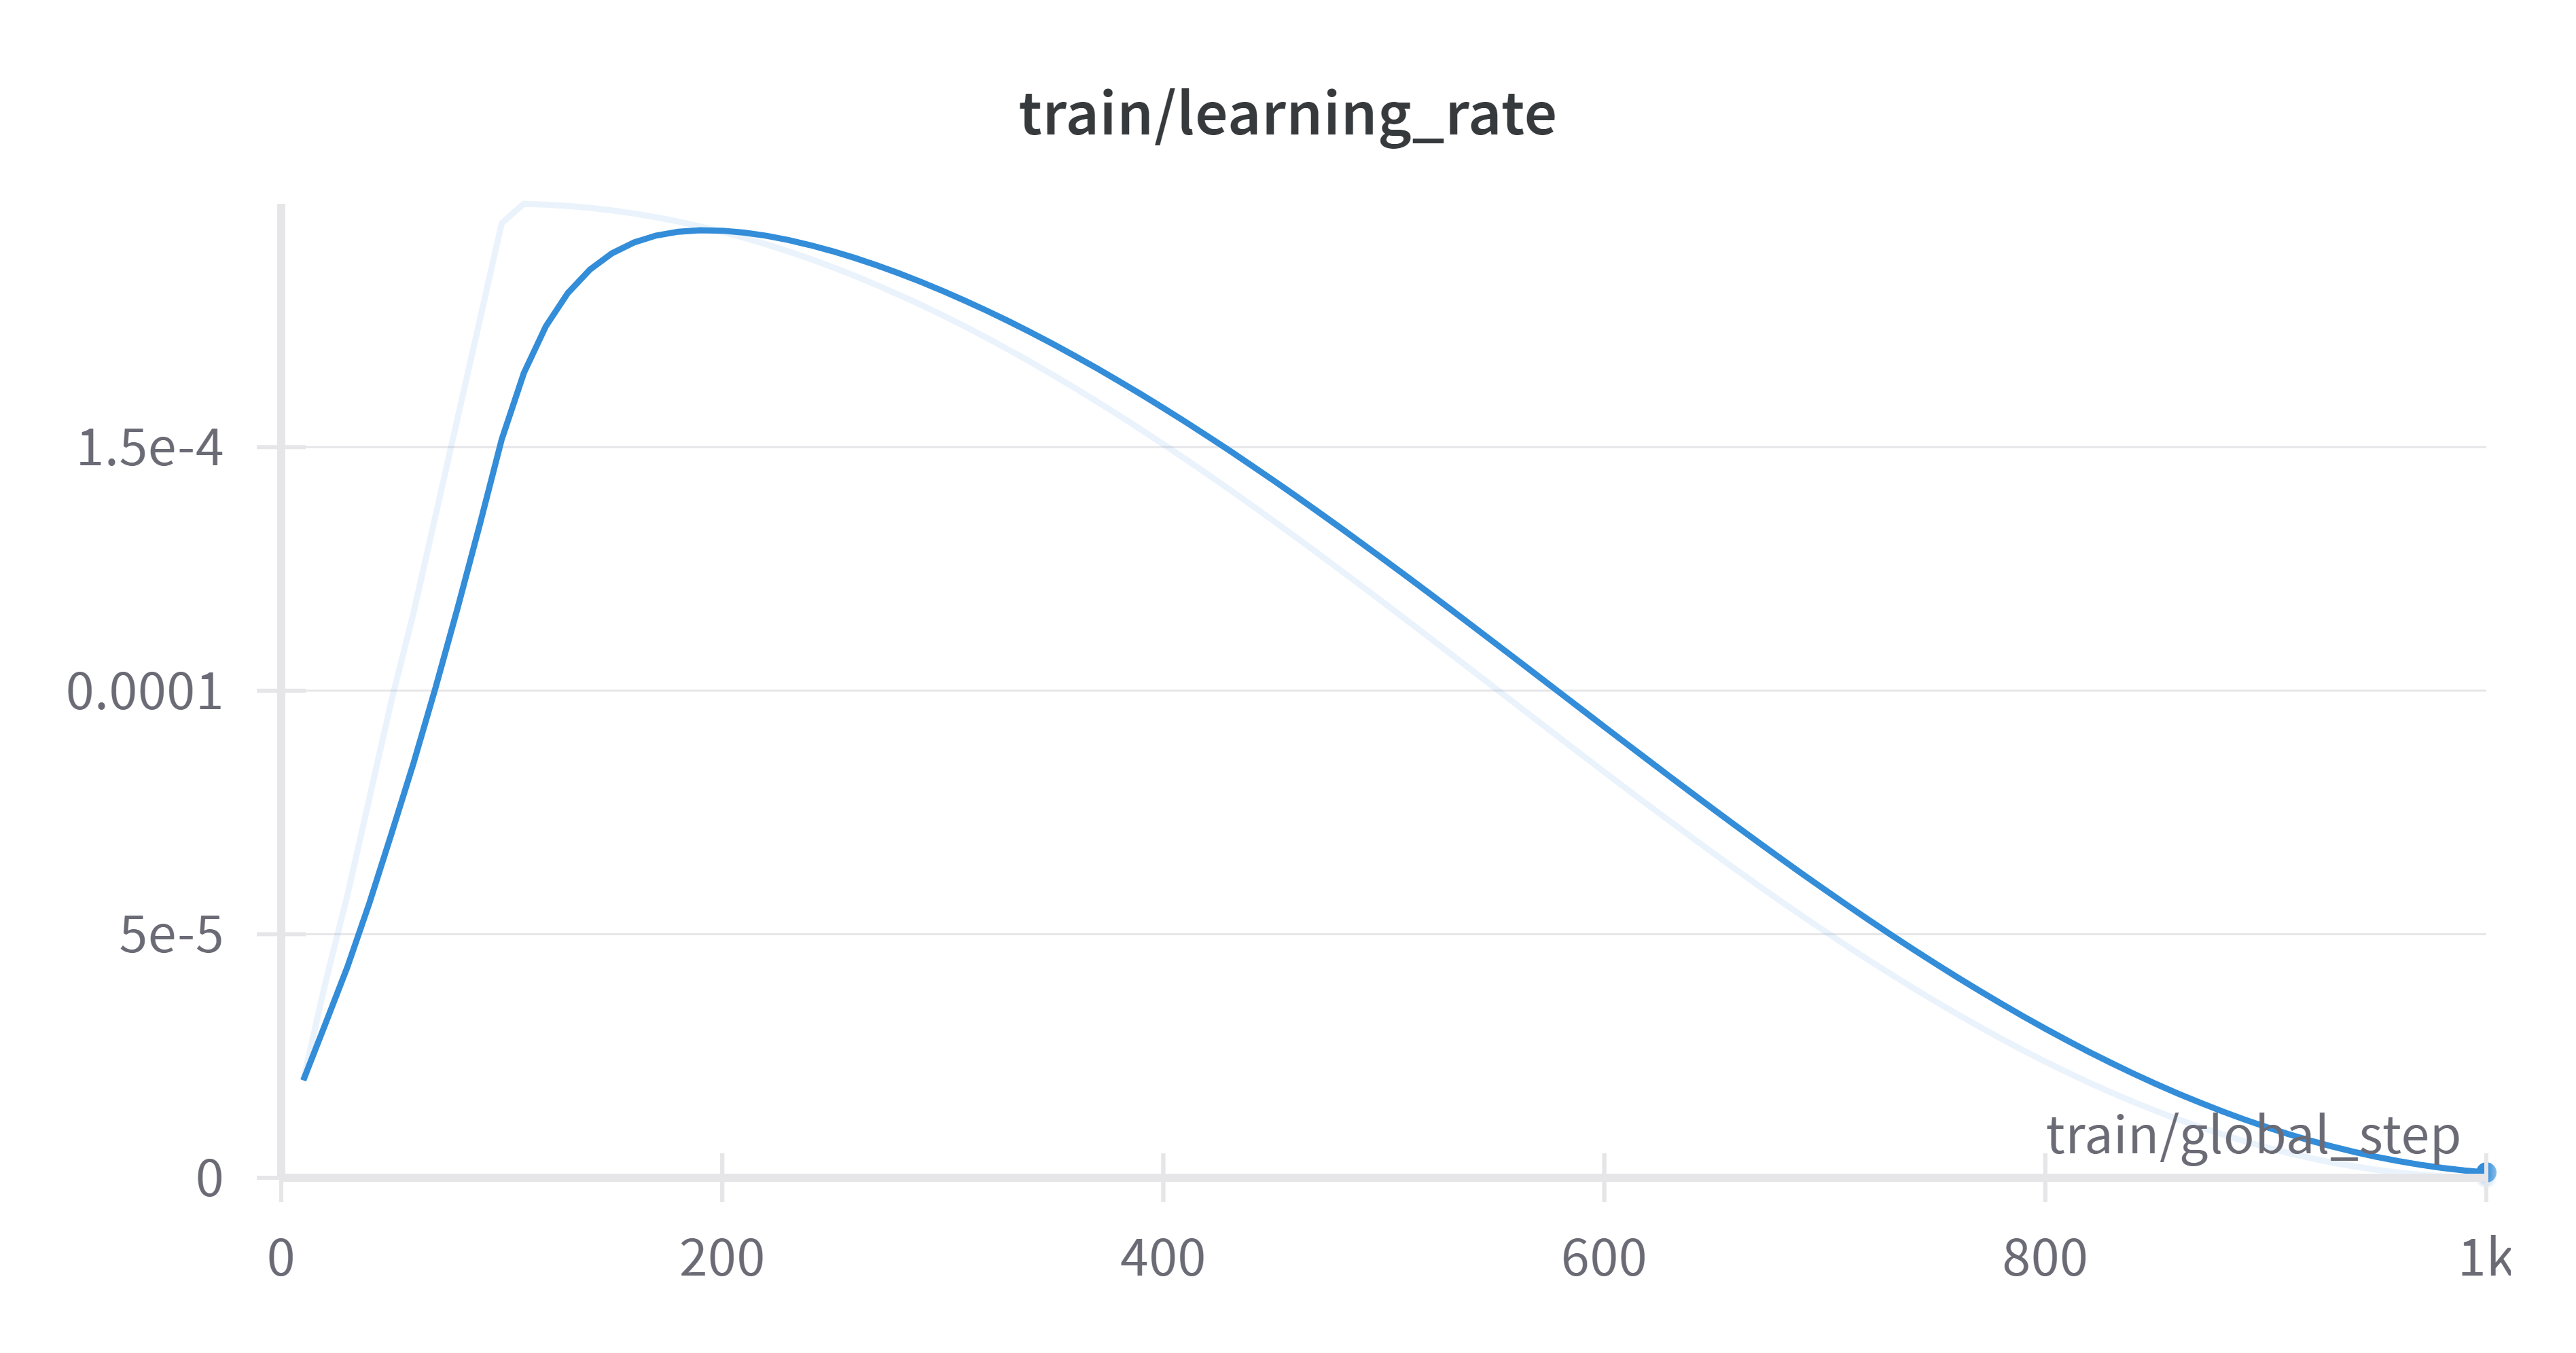 Train/Learning Rate